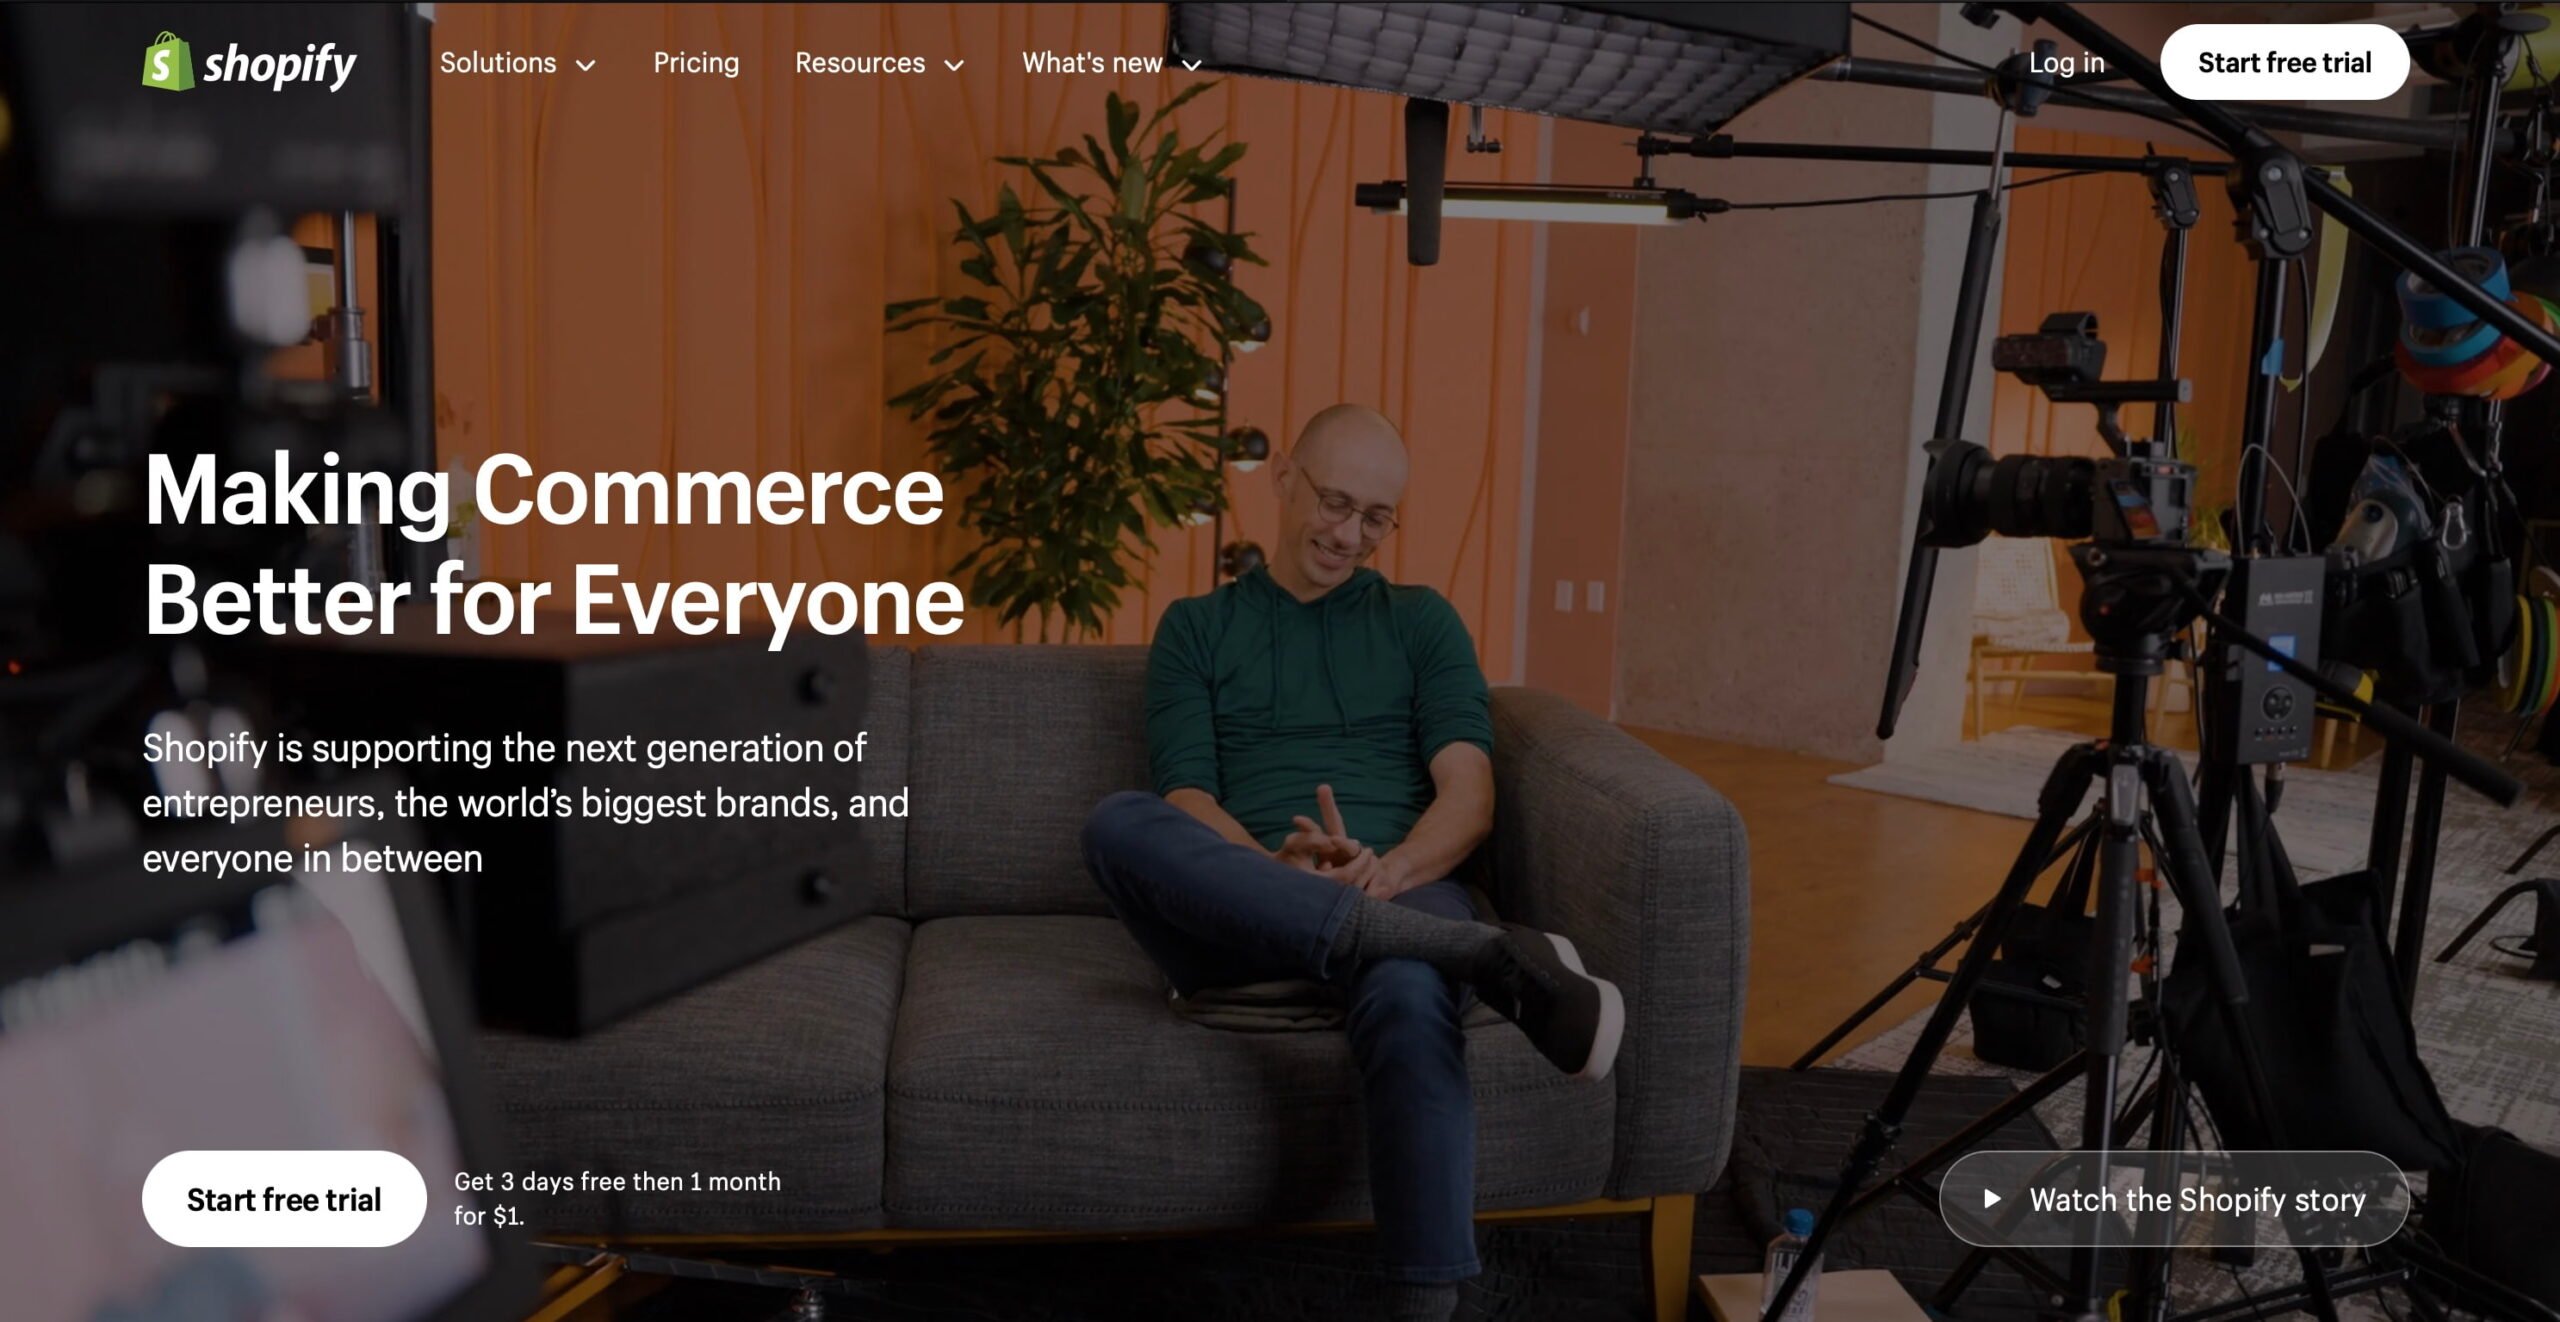 the homepage of the popular ecommerce platform shopify